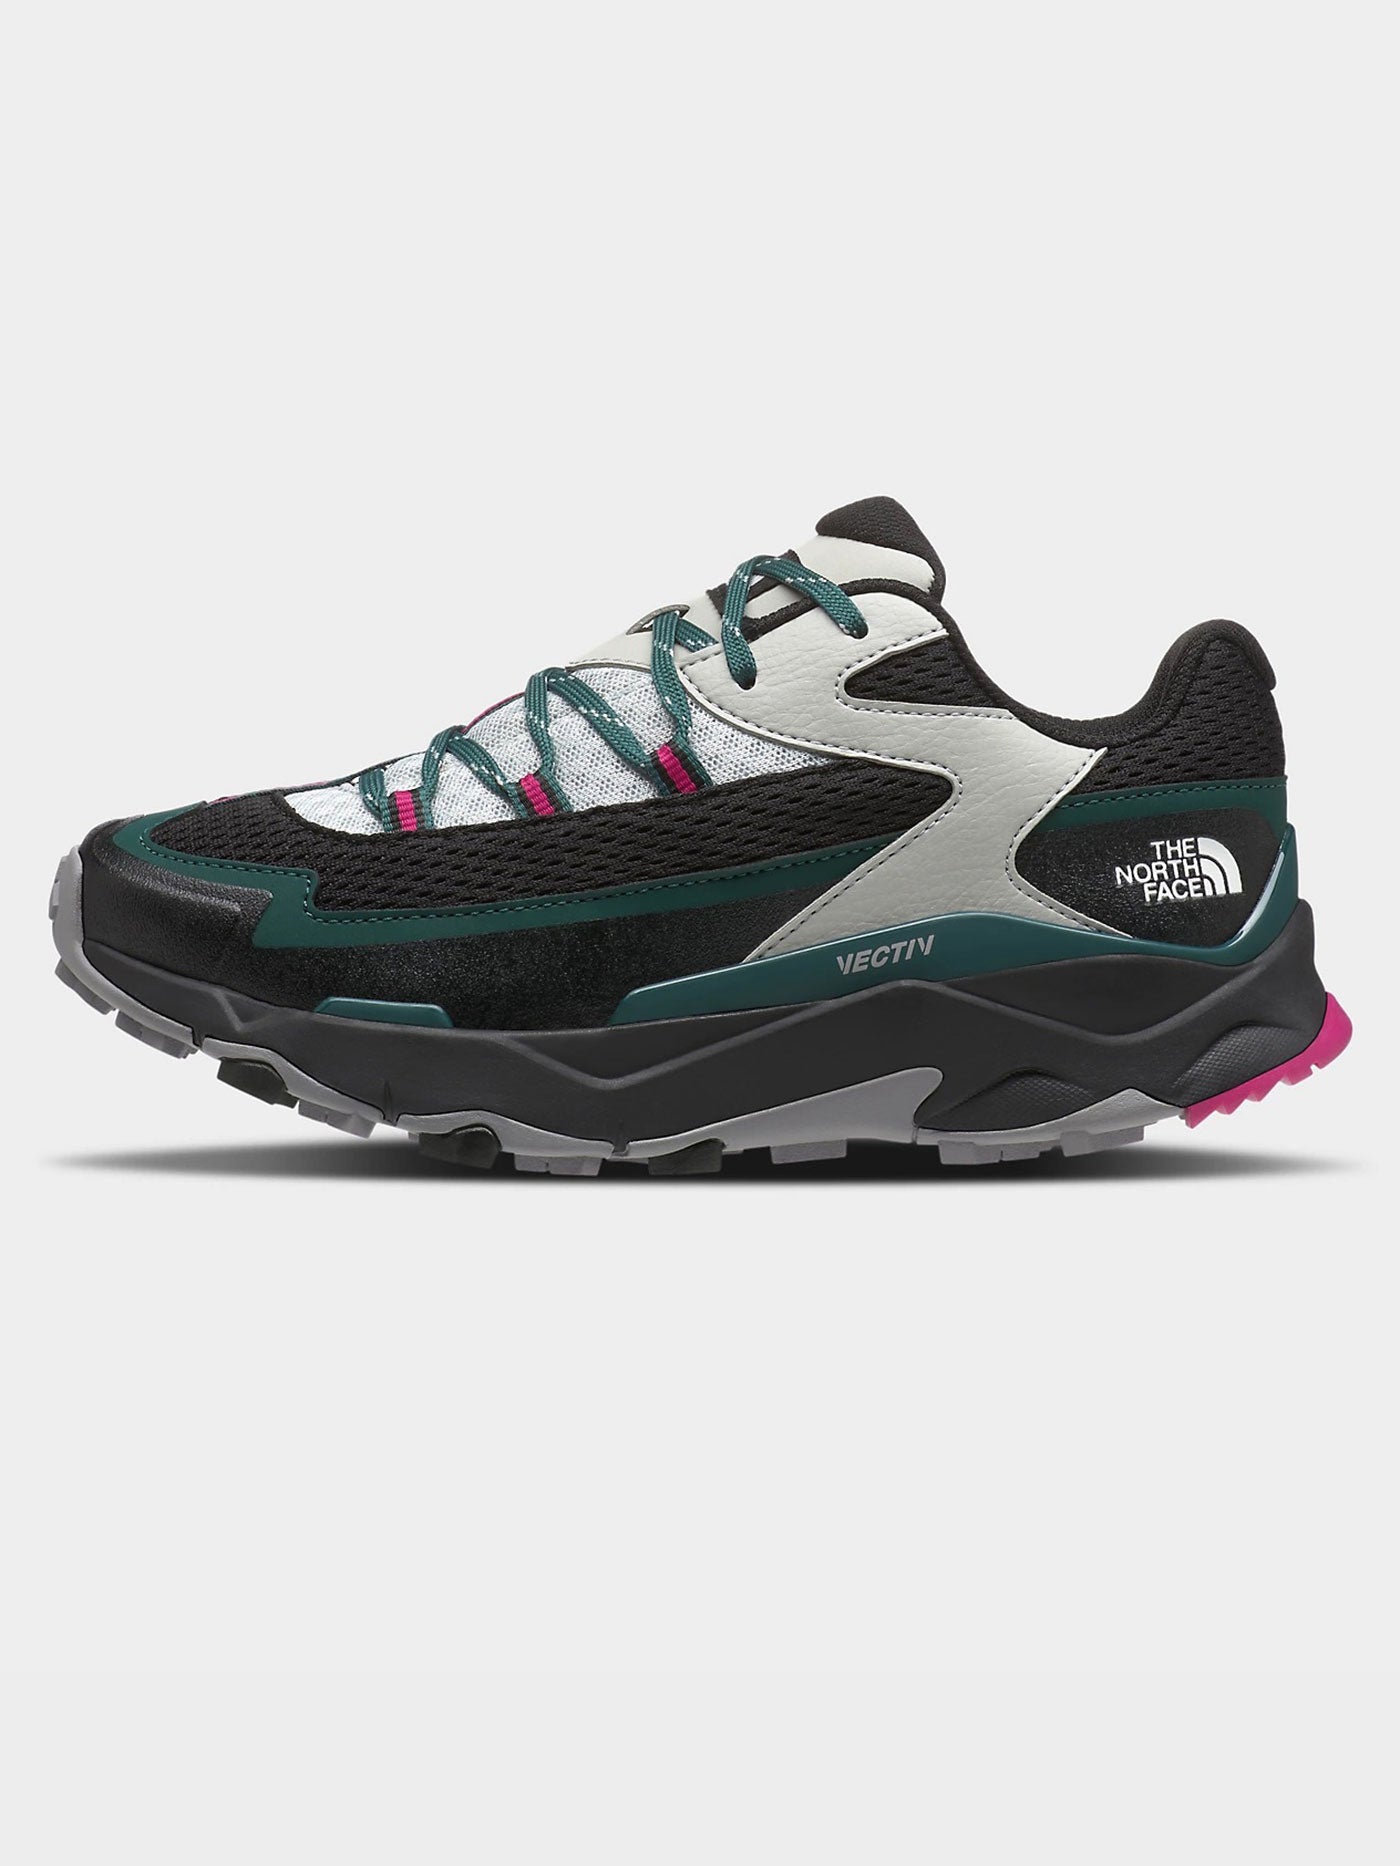 The North Face Vectiv Taraval Shoes